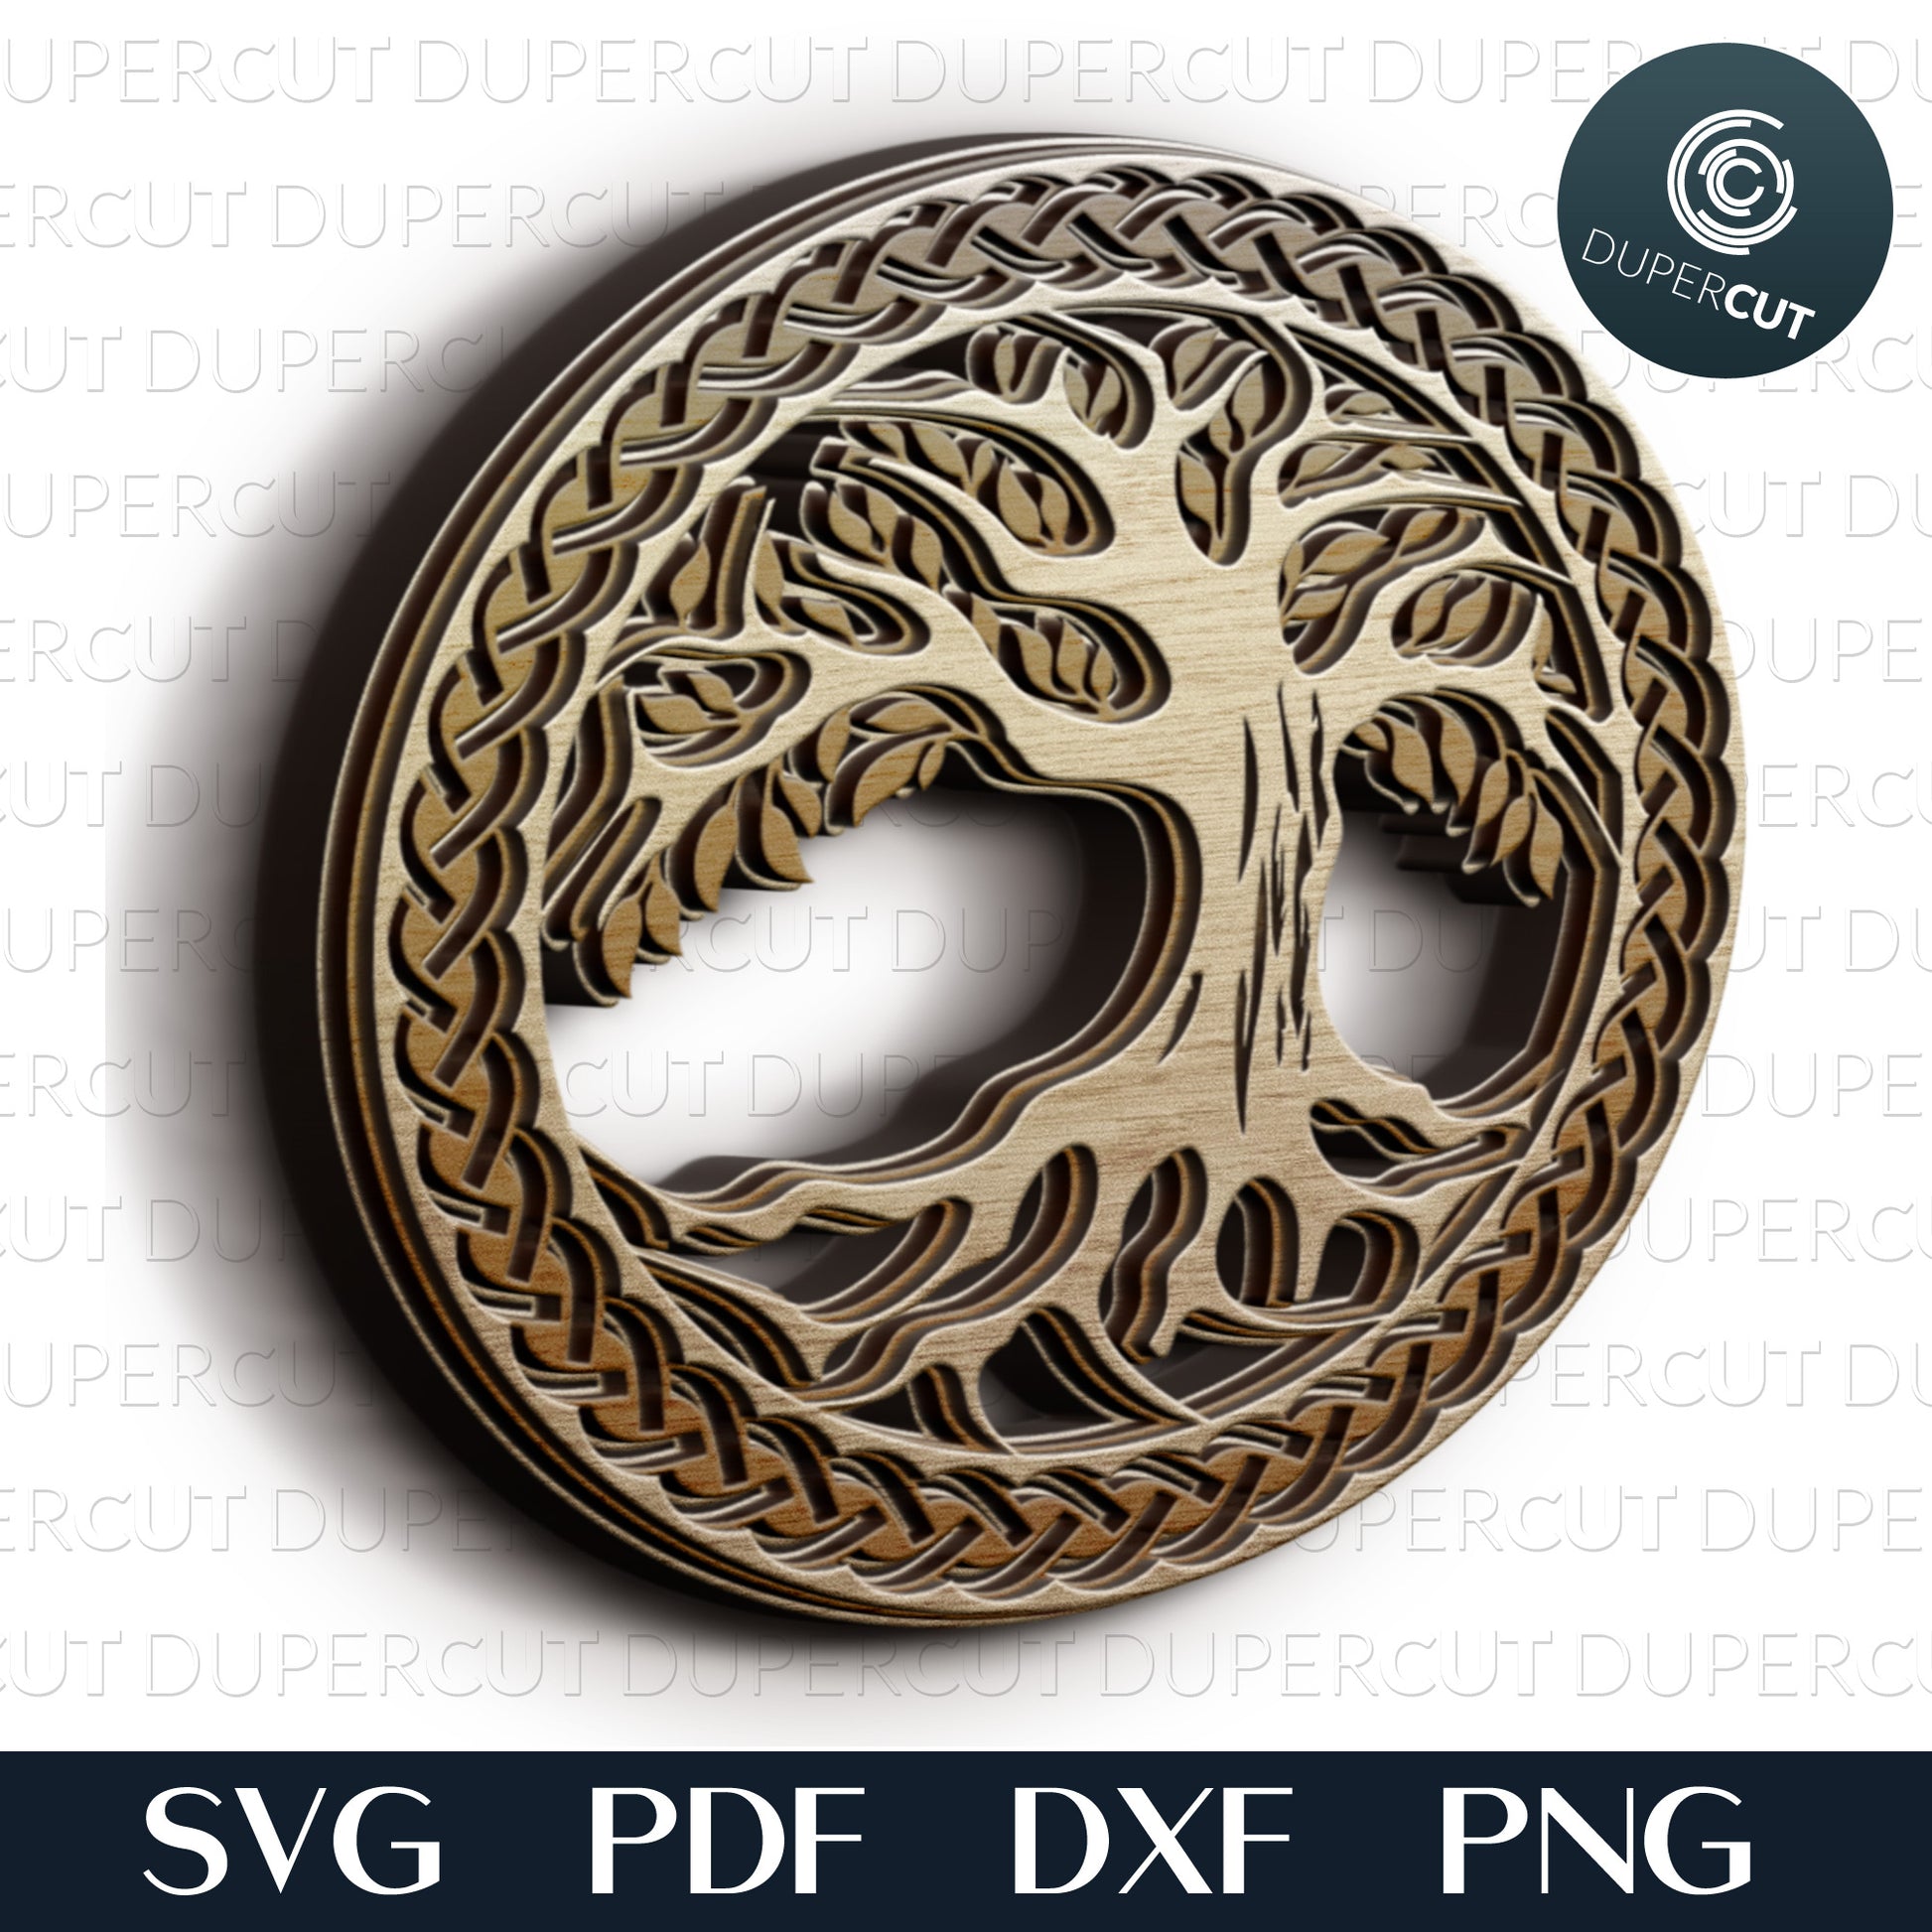 Irish celtic tree of life, layered cut template by DuperCut. SVG PNG DXF vector files for cutting, laser engraving, scrapbooking. For use with Cricut, Glowforge, Silhouette, CNC machines.